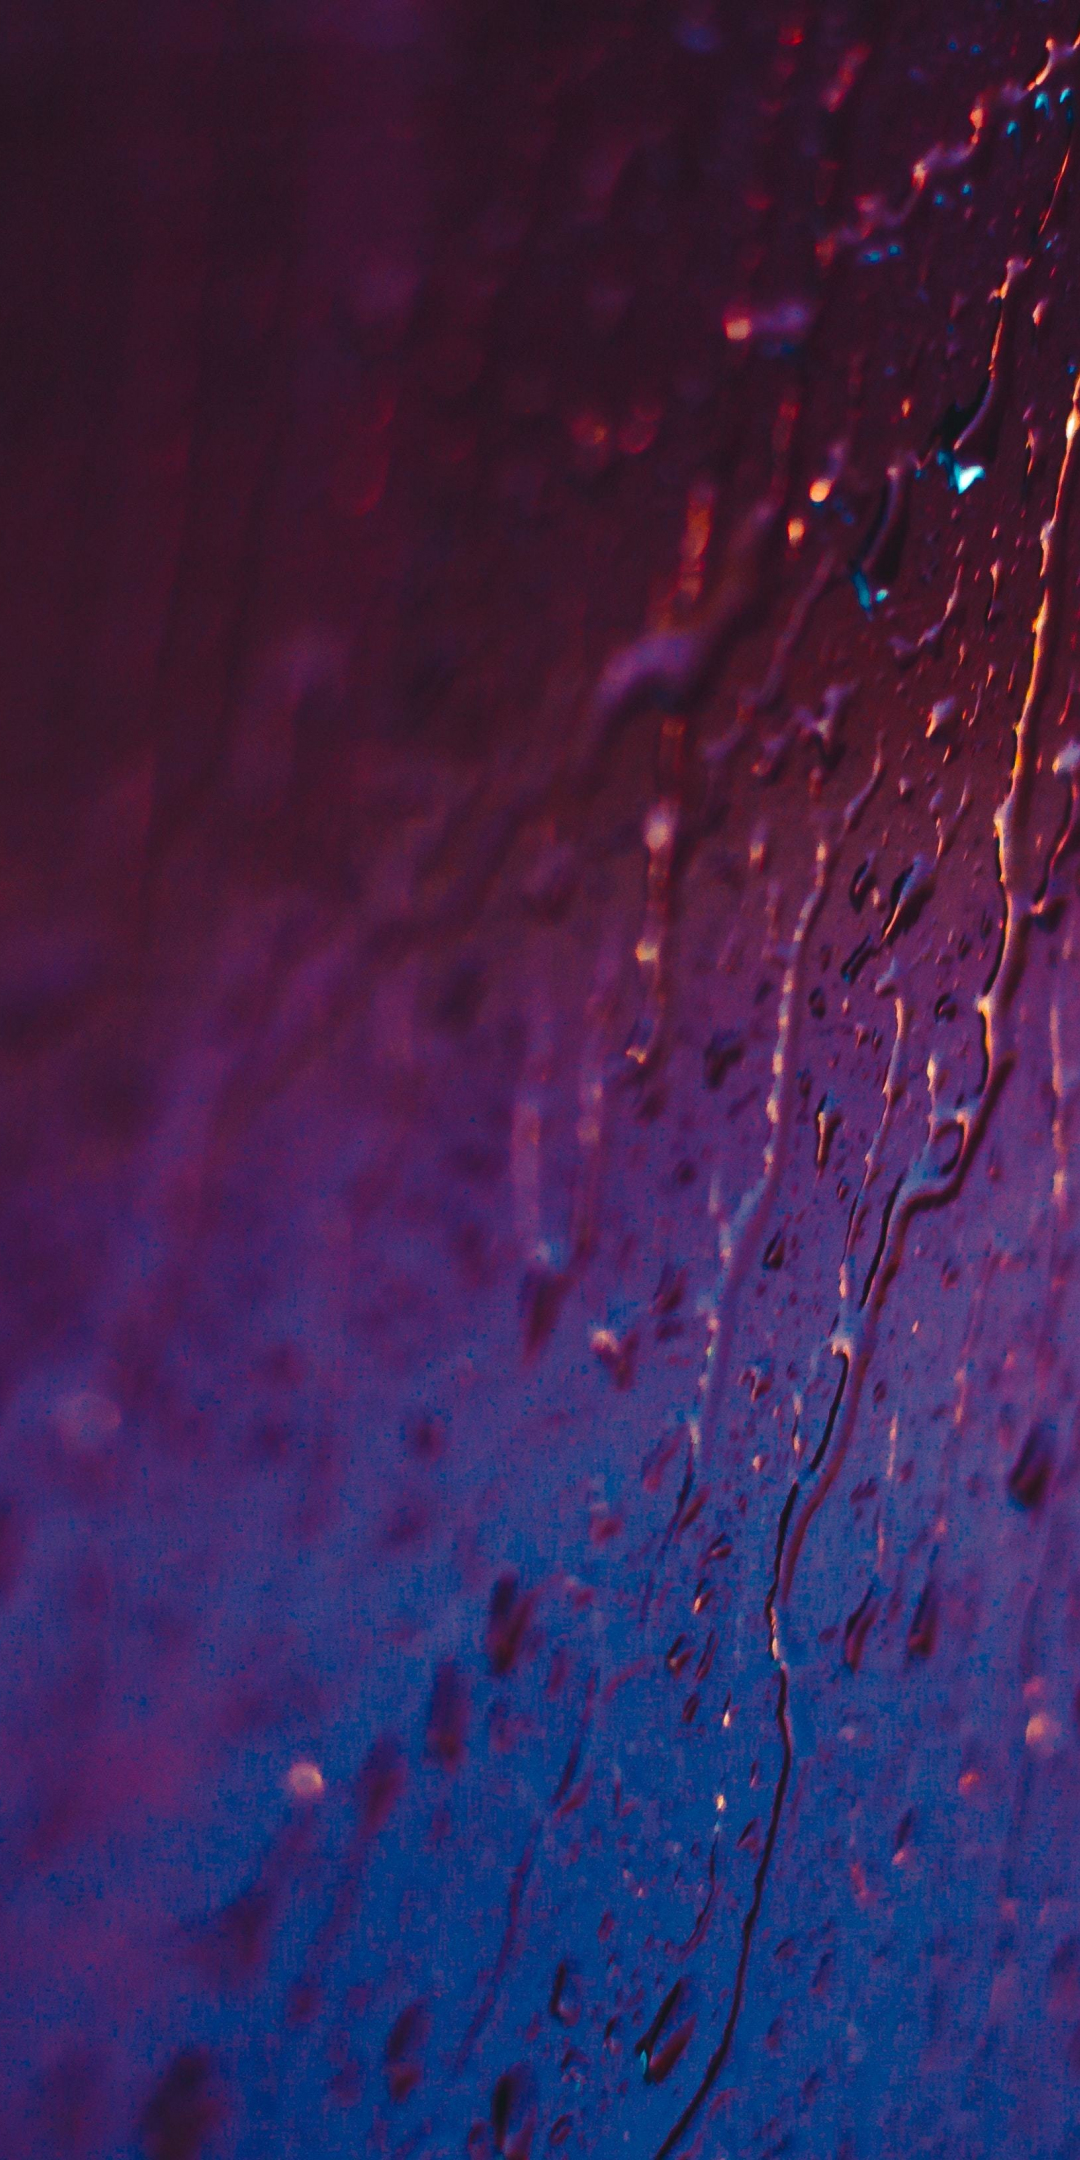 Download wallpaper 1080x2160 pink, surface, water drops, blur, honor 7x ...